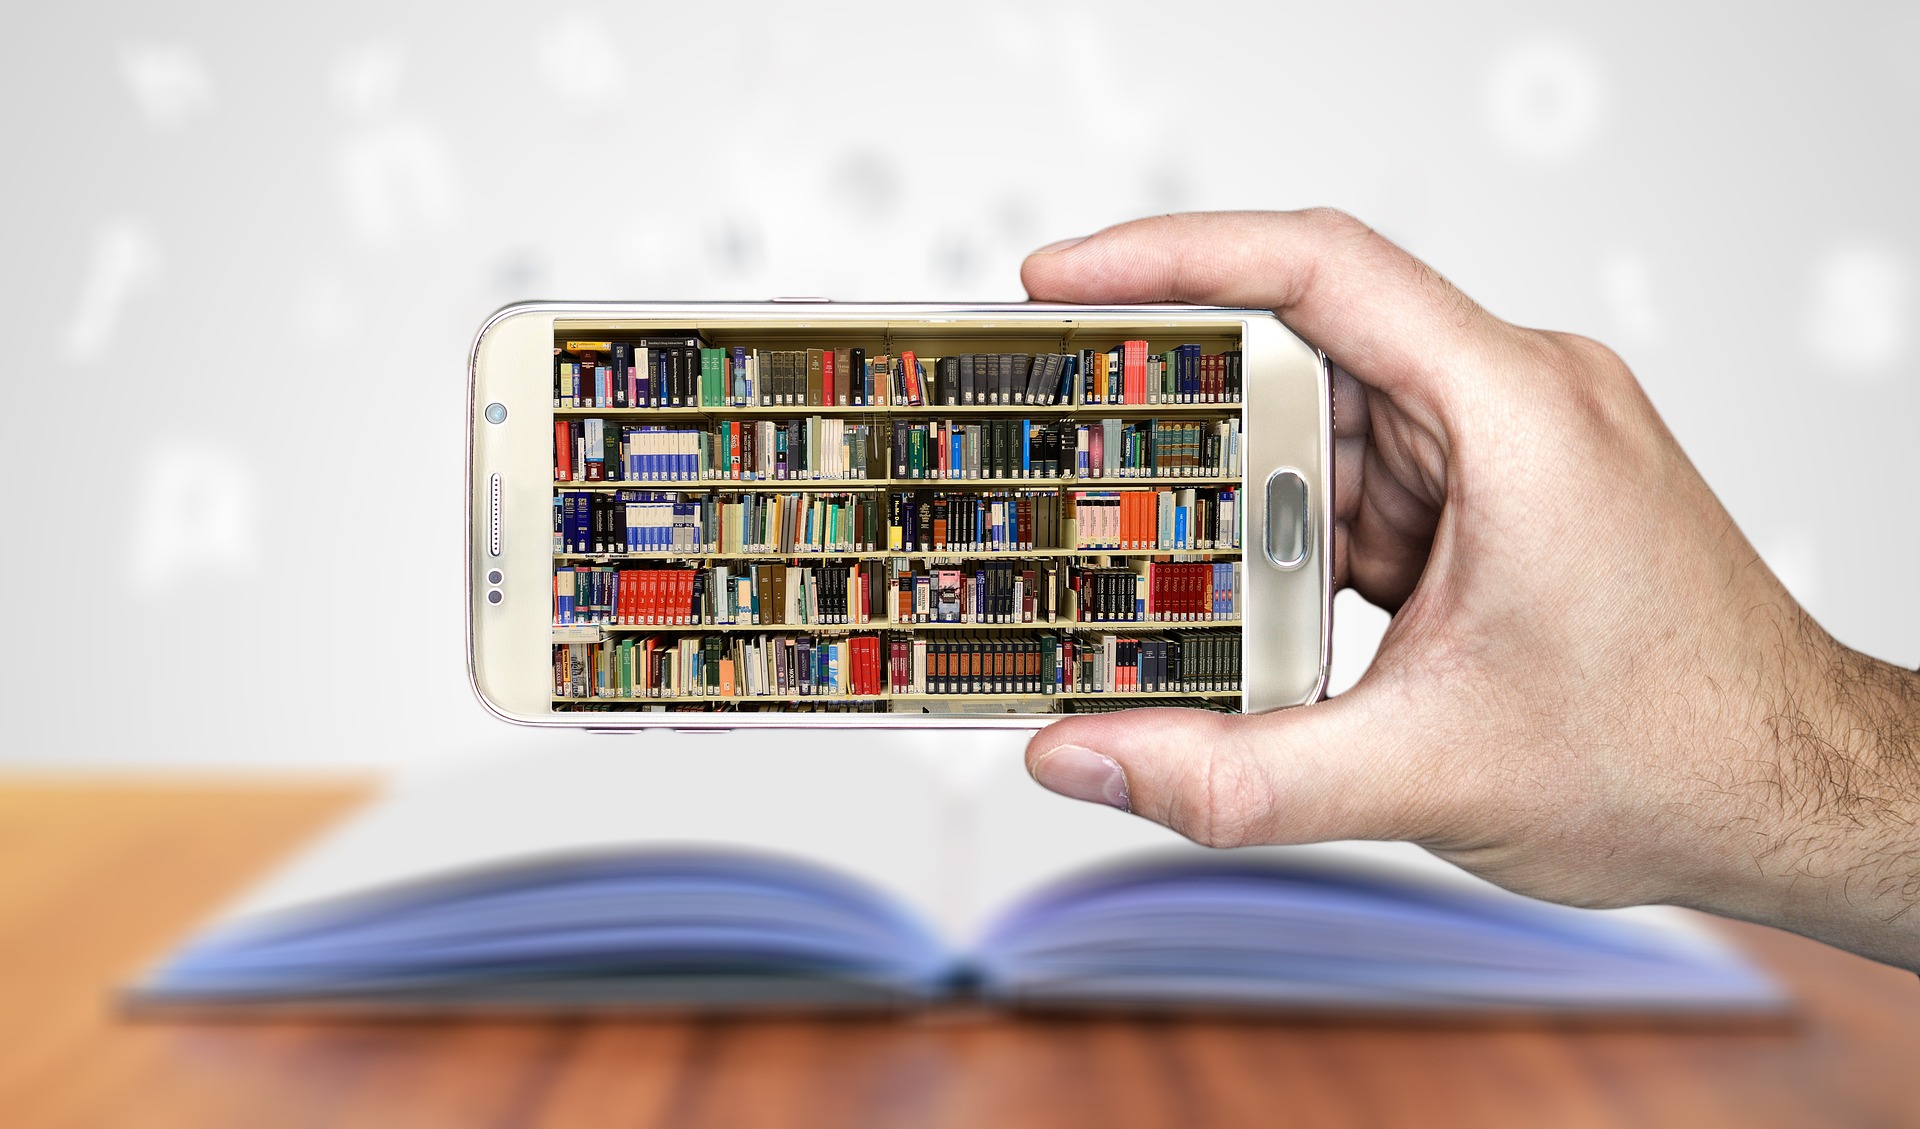 Picture of a hand holding a smart phone that is displaying library shelves filled with books.